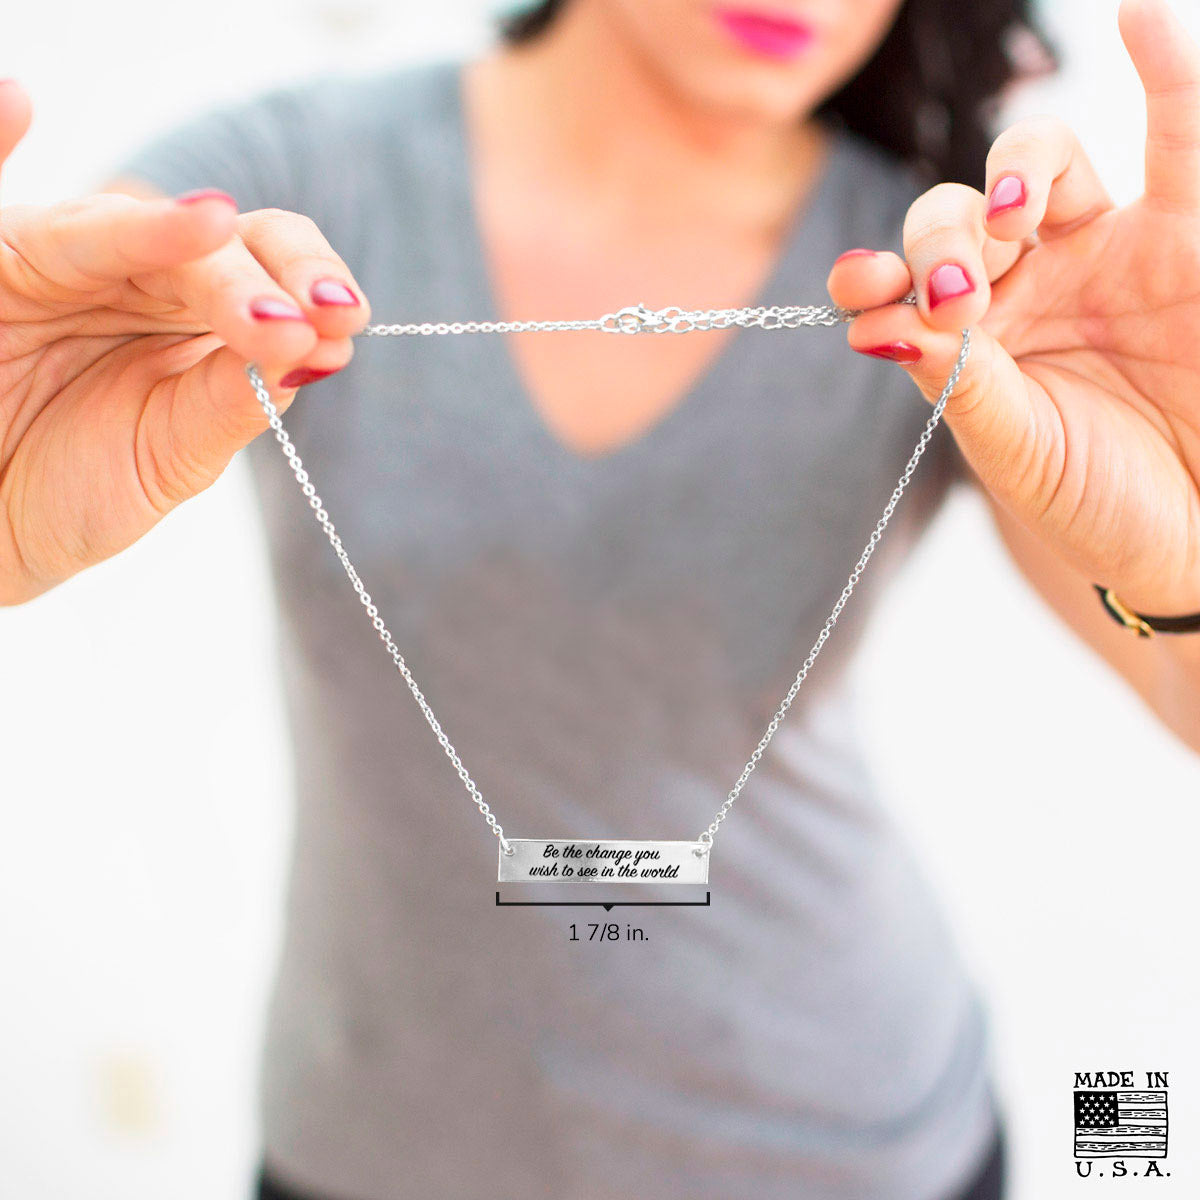 Silver Be the change you wish to see in the world Bar Necklace